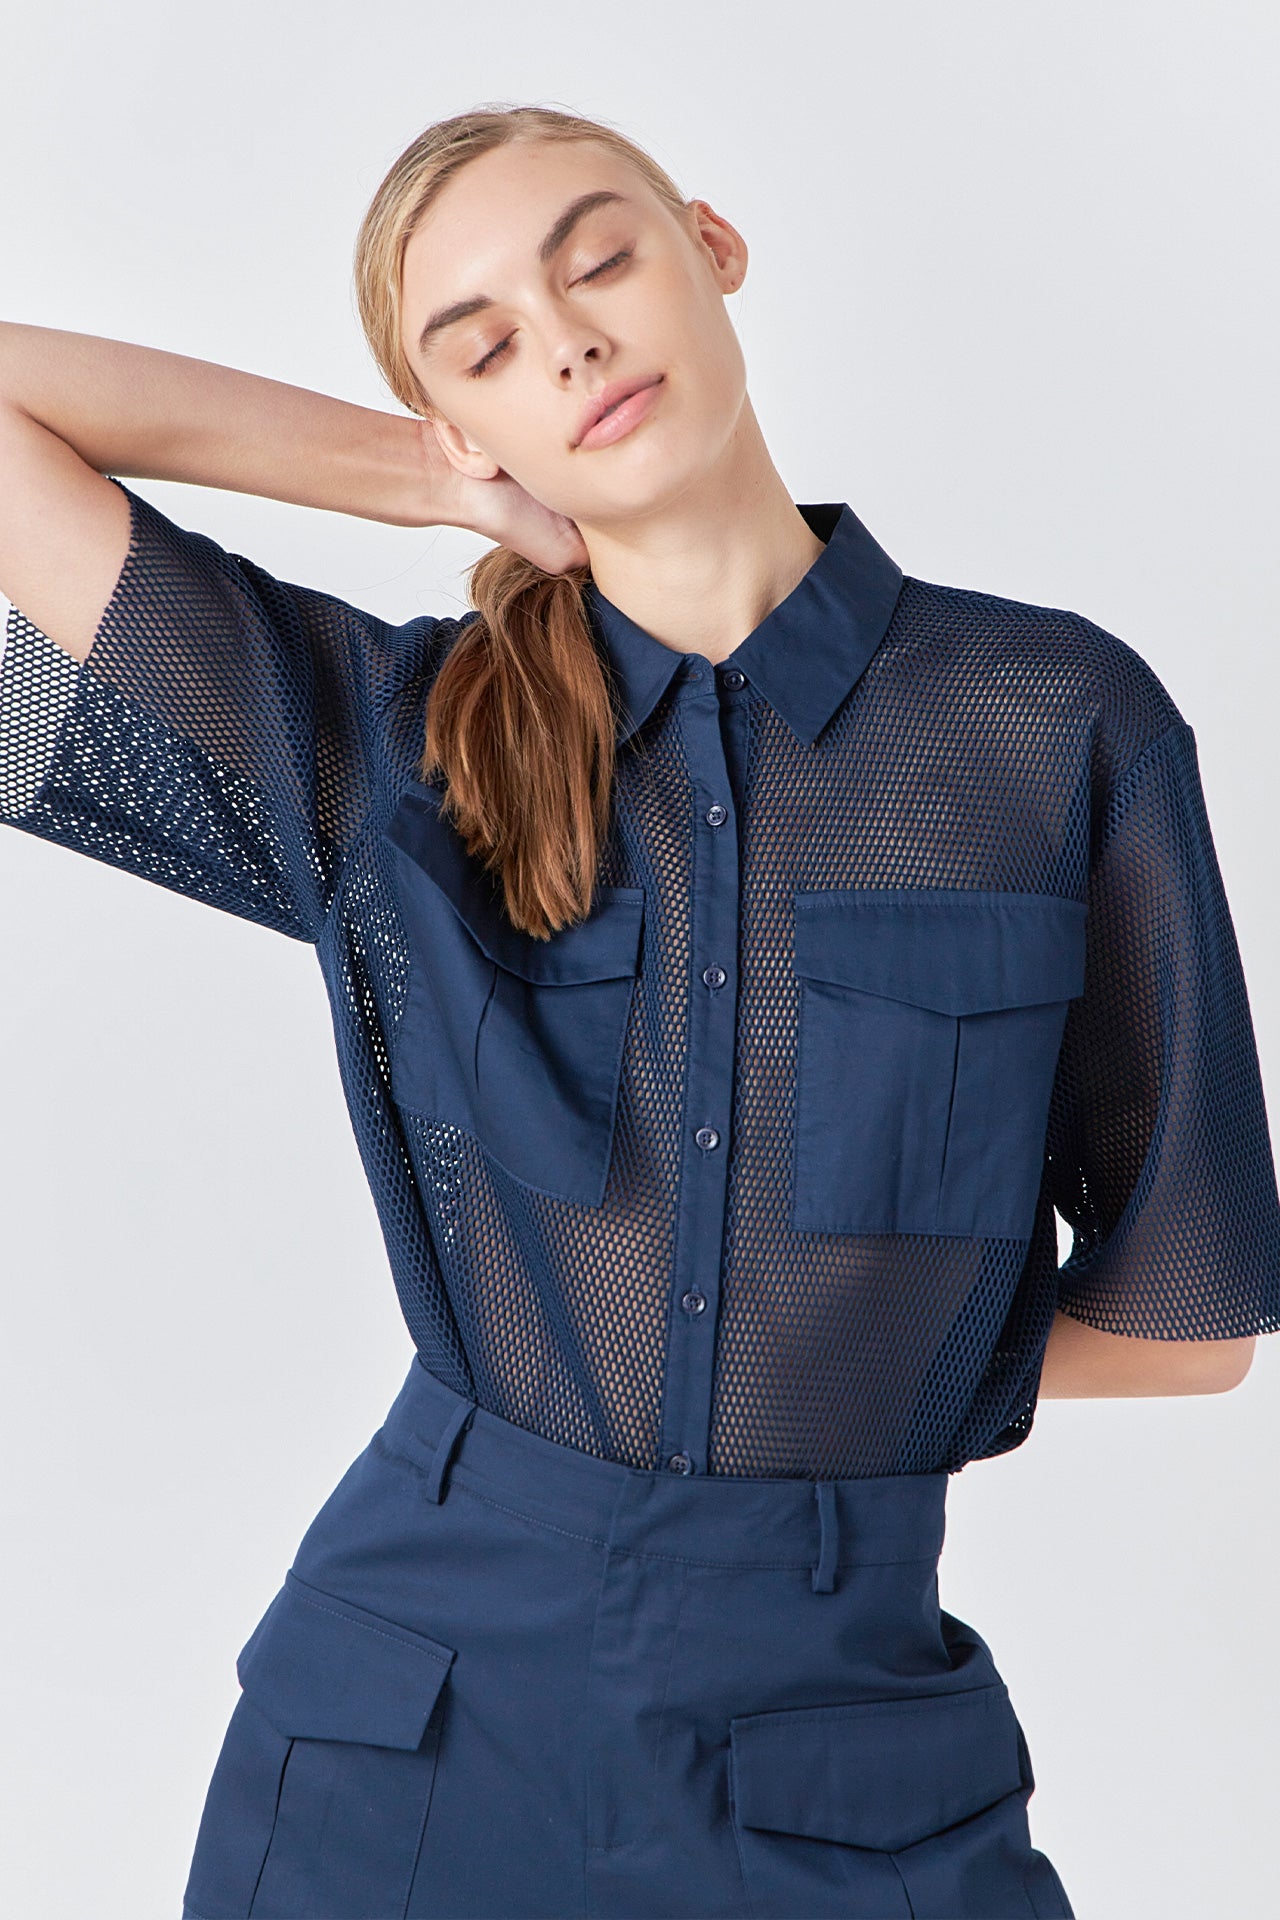 Mesh Net Top with Pockets